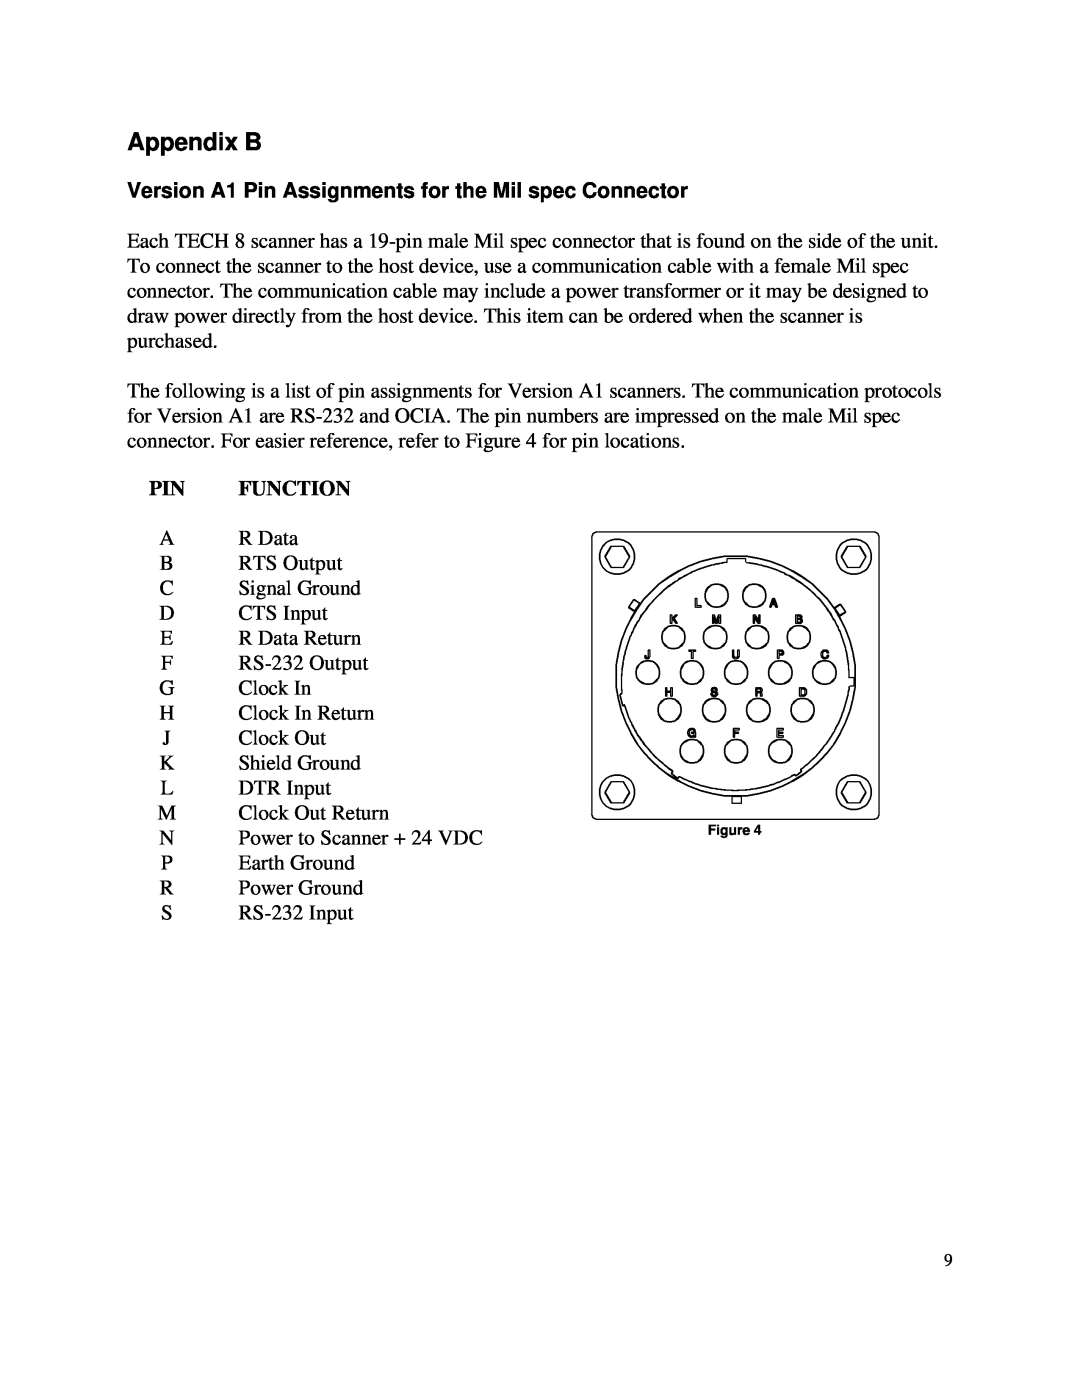 Metrologic Instruments TECH 8 manual Appendix B, Pin Function, Version A1 Pin Assignments for the Mil spec Connector 